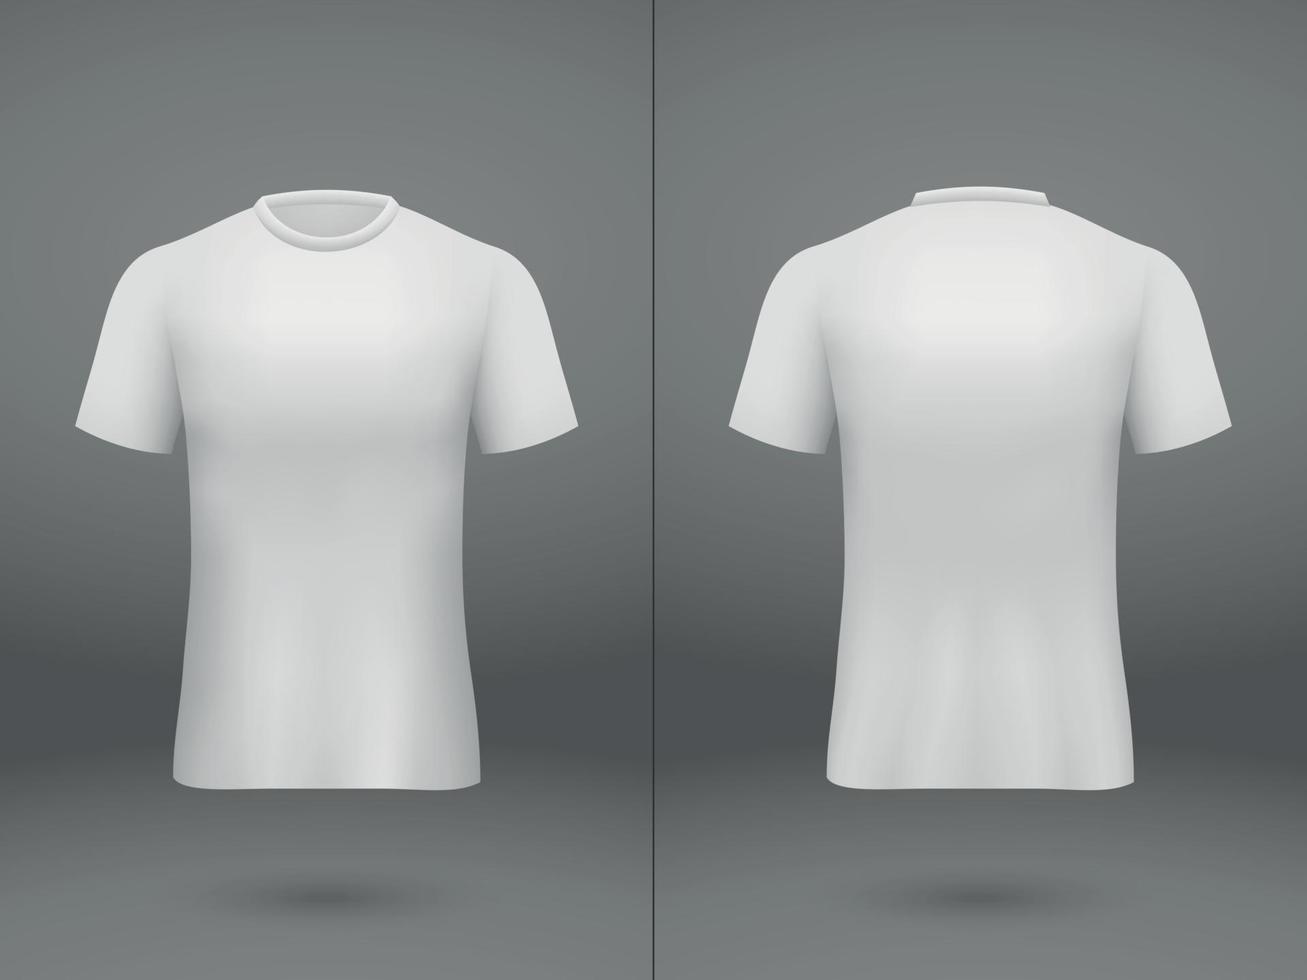 realistic template soccer jersey vector